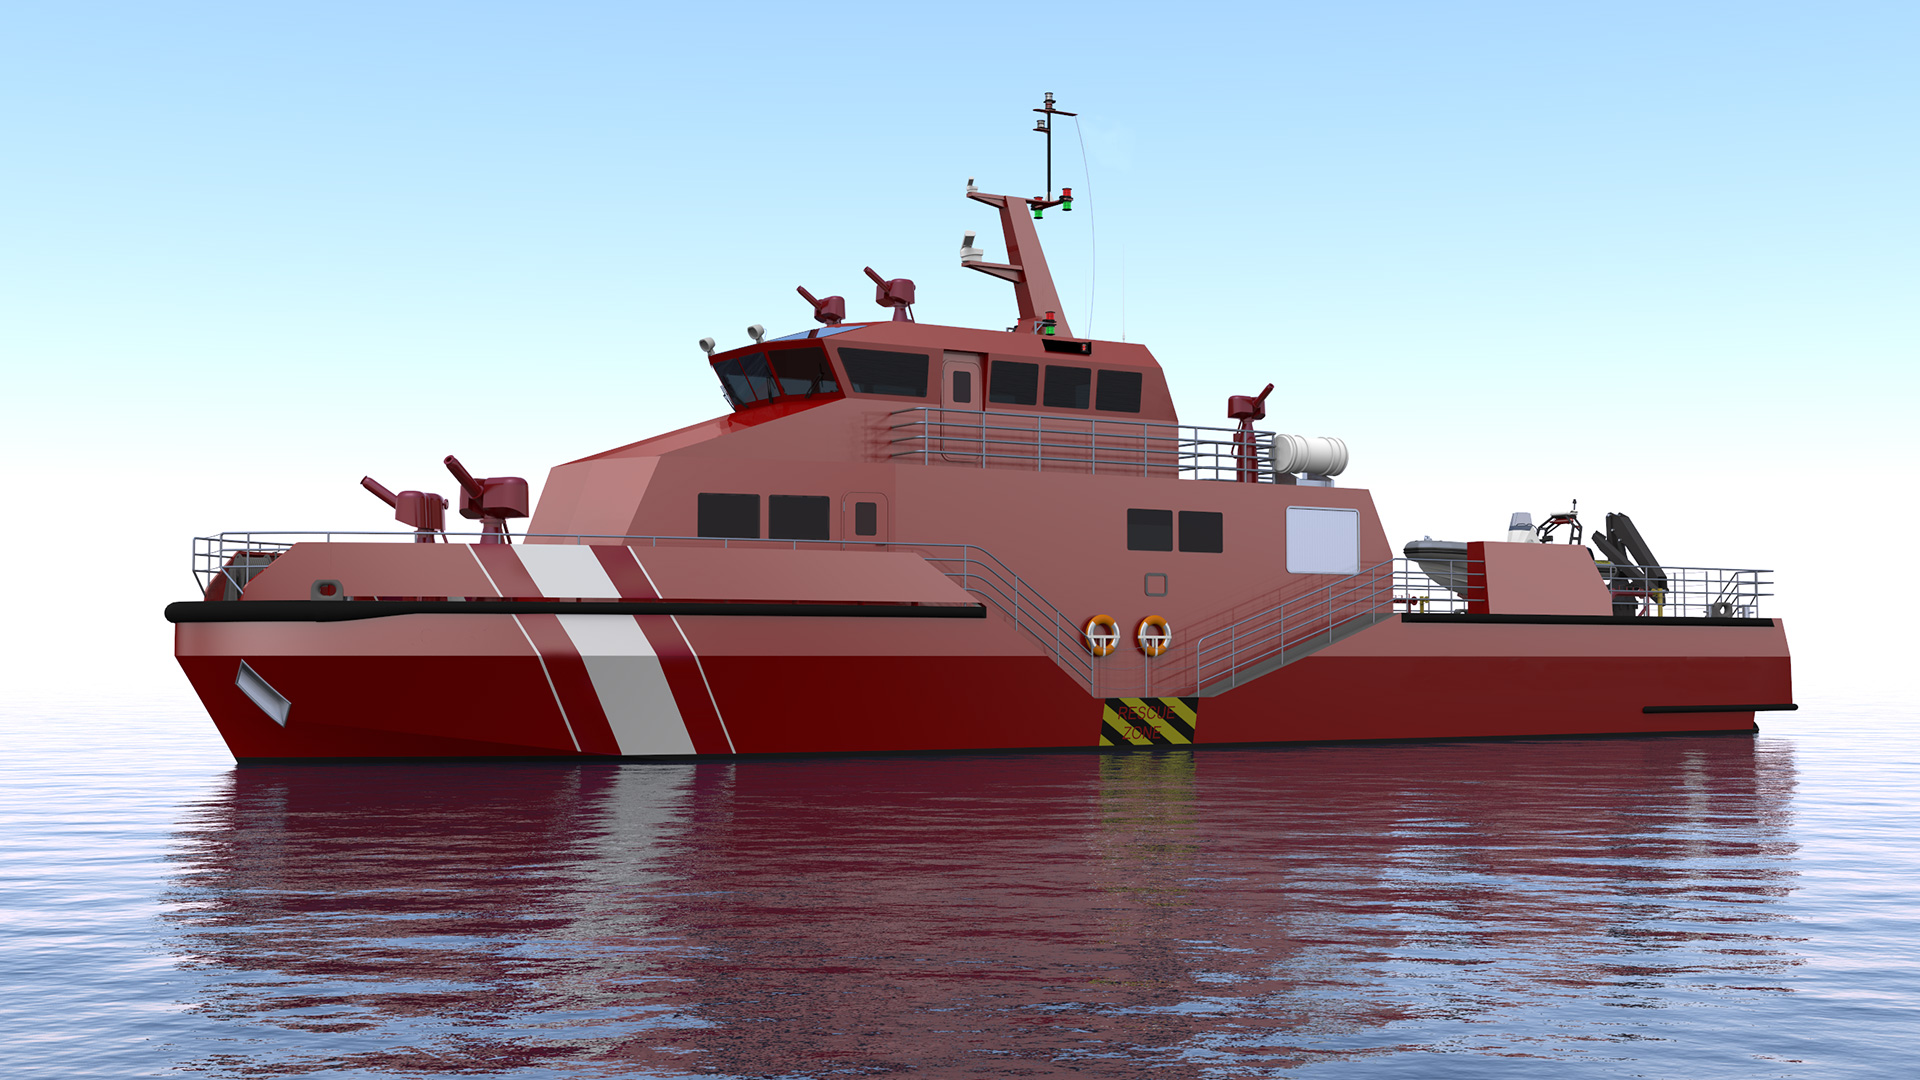 images/vessels/03-utility-support-craft/02-fire-fighting-vessels/01-ares-35-fifi/ares-35-fifi-01_1687355099.jpg